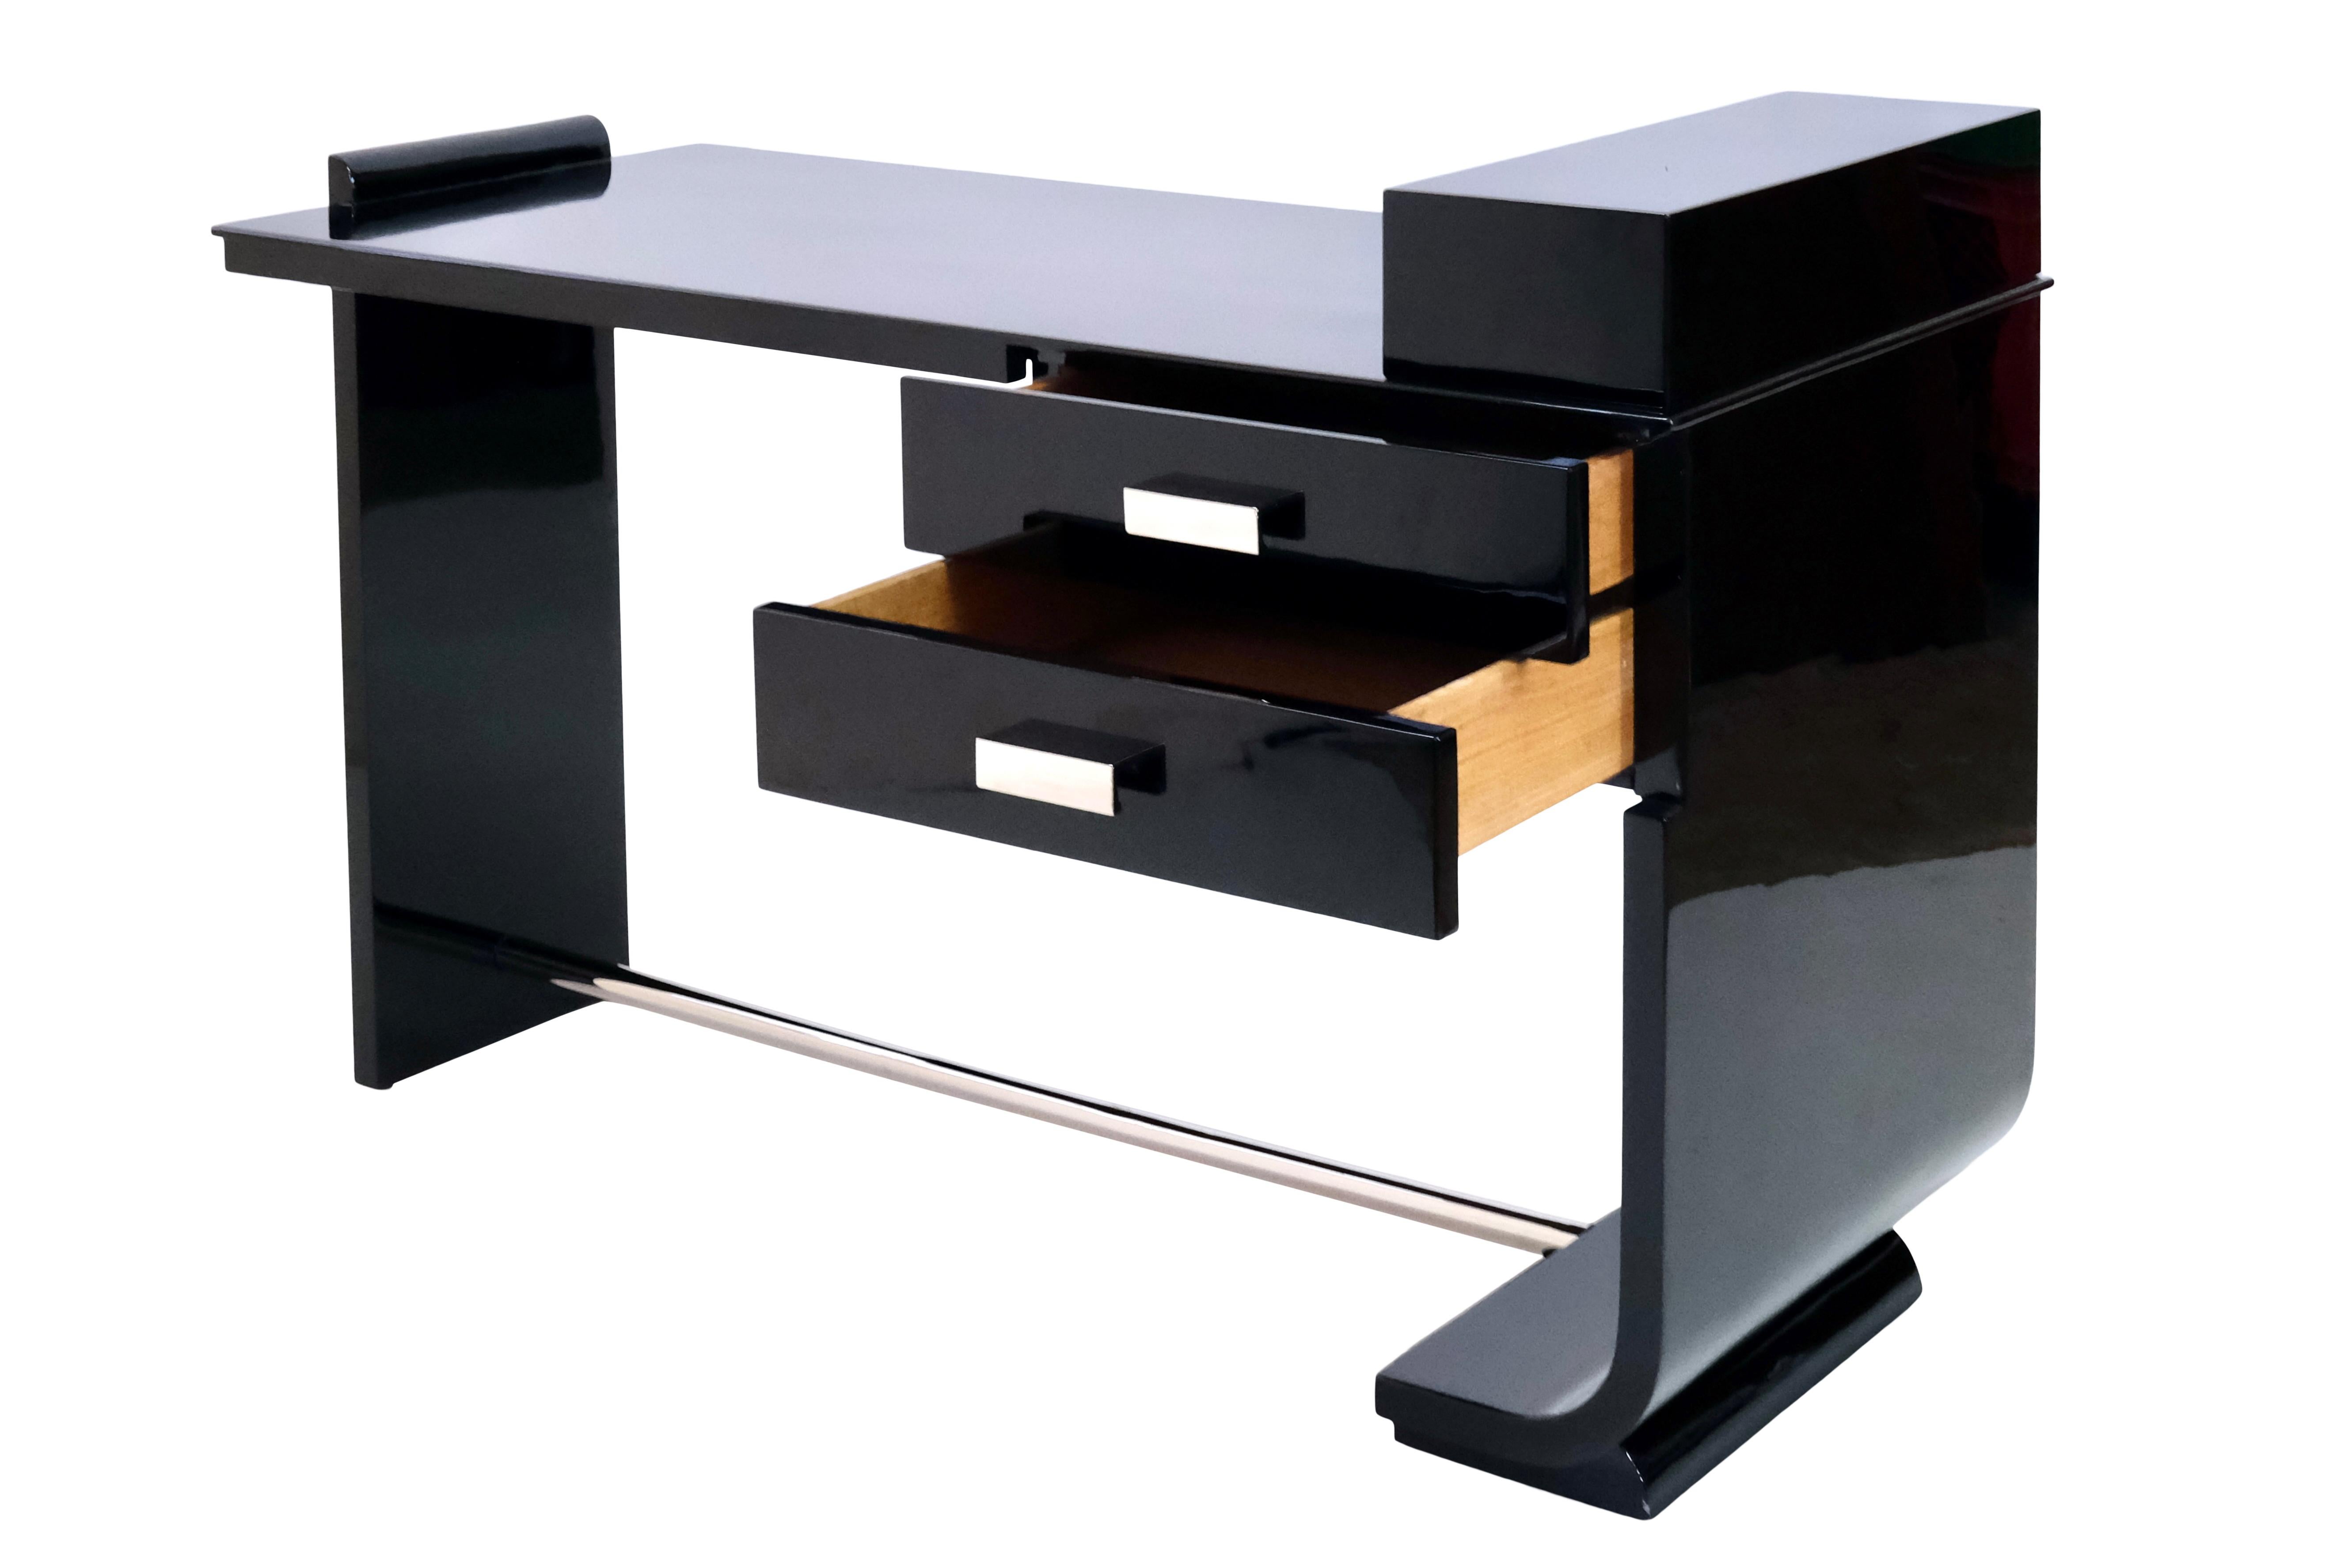 Blackened Small Asymmetrical Art Deco Office Desk in Black Lacquer with Nickeled Fittings